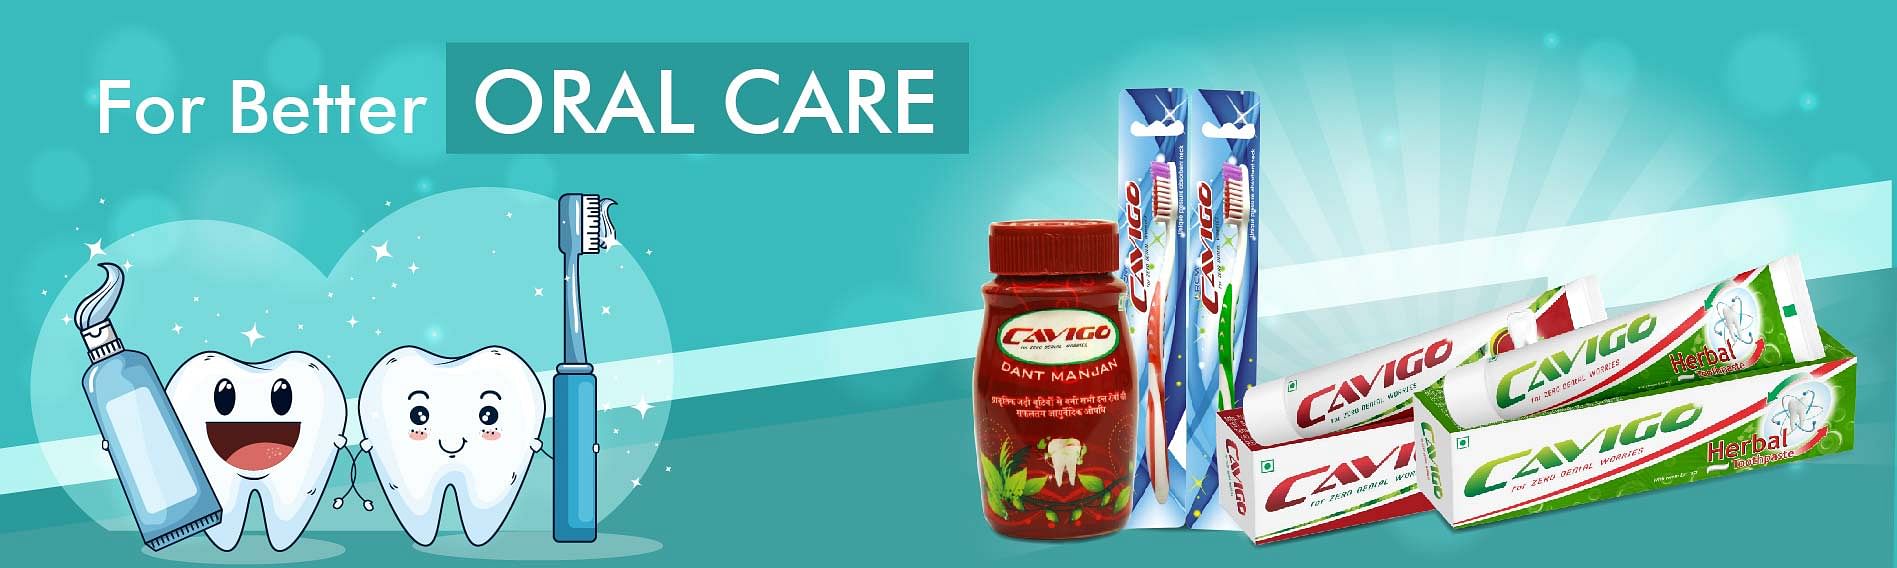 PERSONAL CARE, Oral Care, Toothpaste